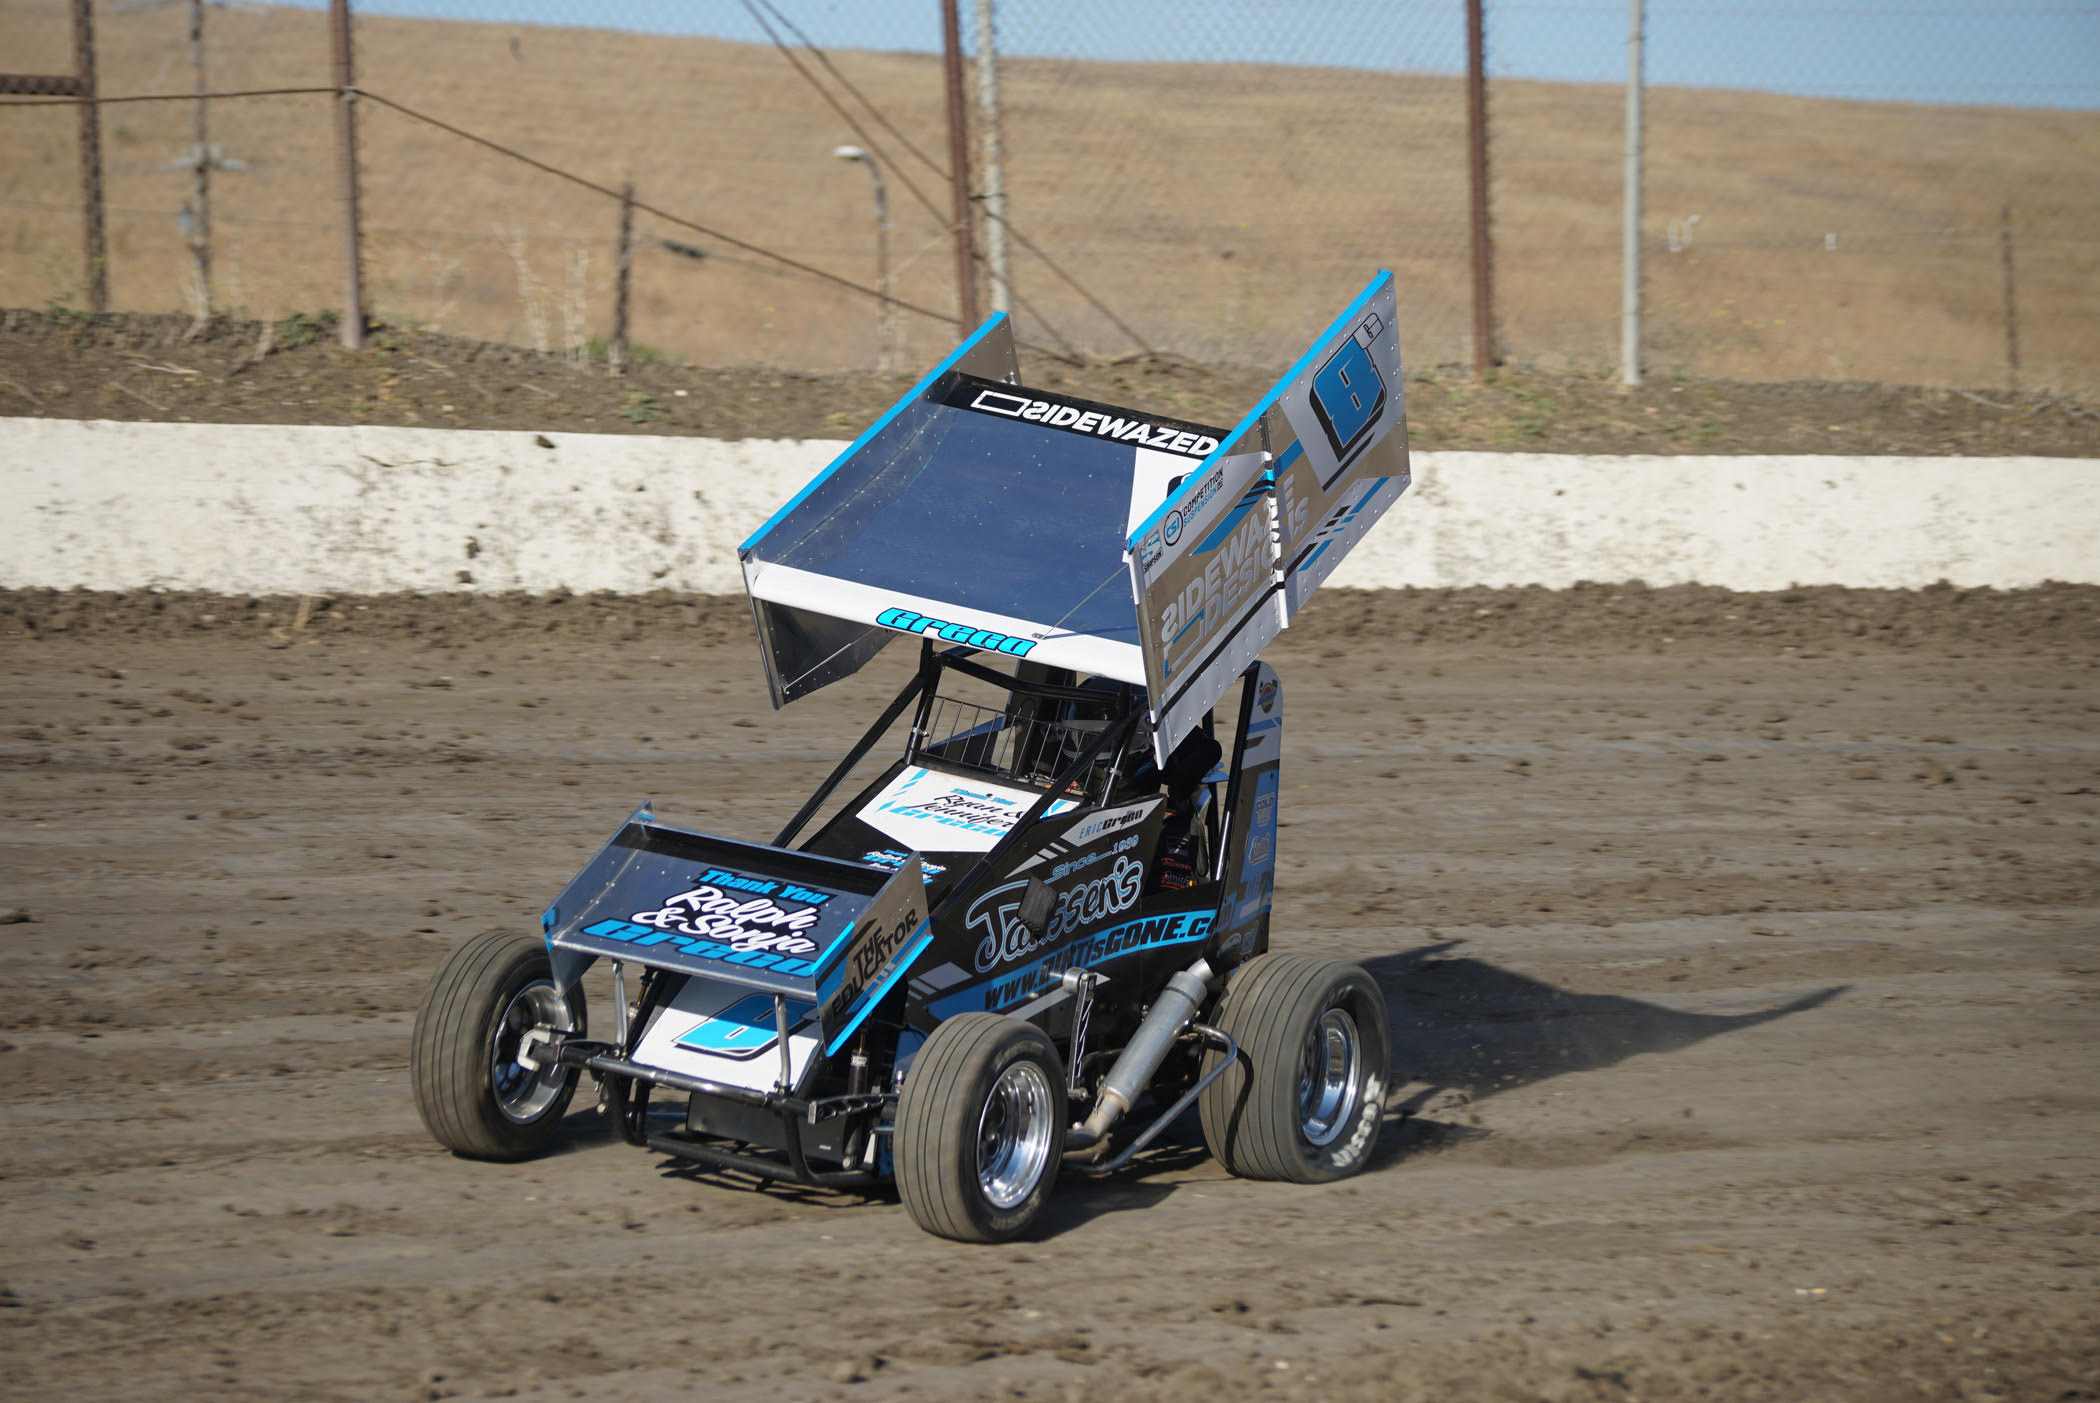 GRECO WINS VENTURA MAIN EVENT AND TAKES CALIFORNIA LIGHTNING SPRINT CAR SERIES POINT LEAD